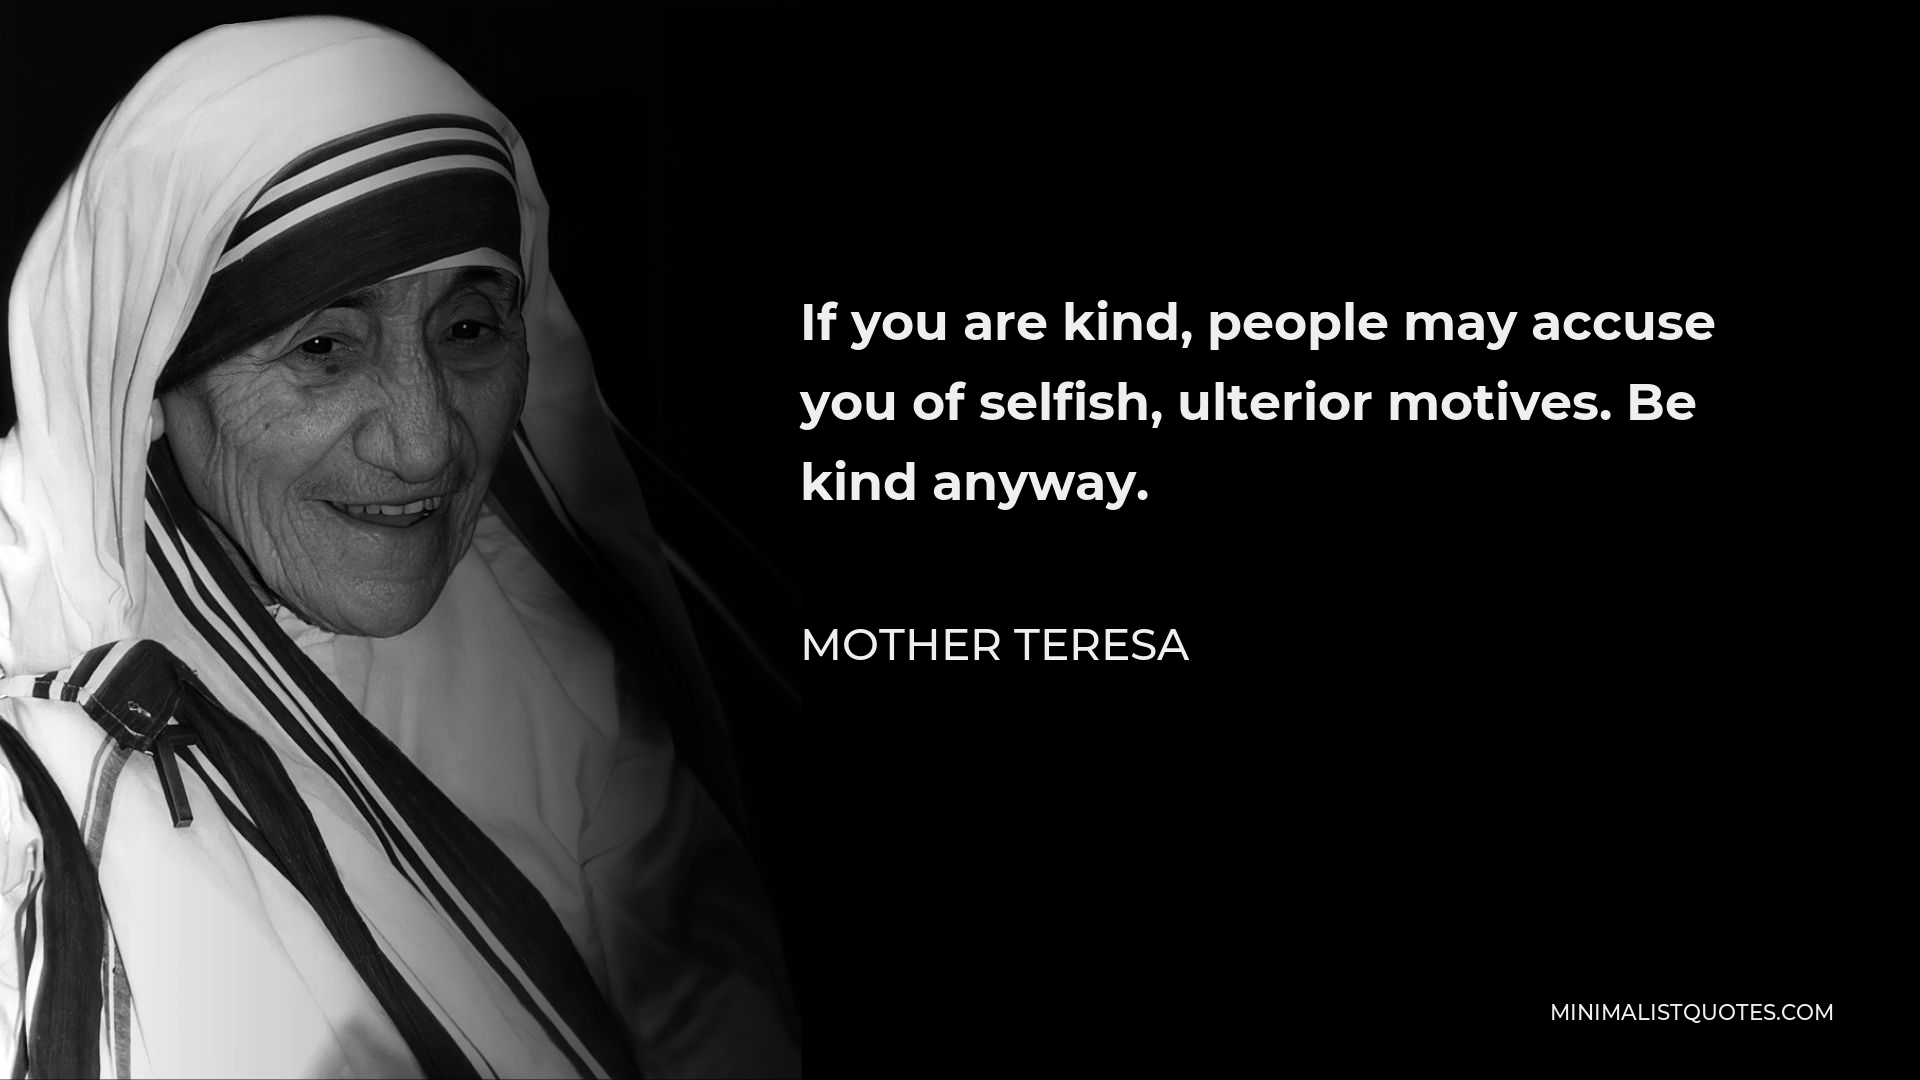 Mother Teresa Quote - If you are kind, people may accuse you of selfish, ulterior motives. Be kind anyway.